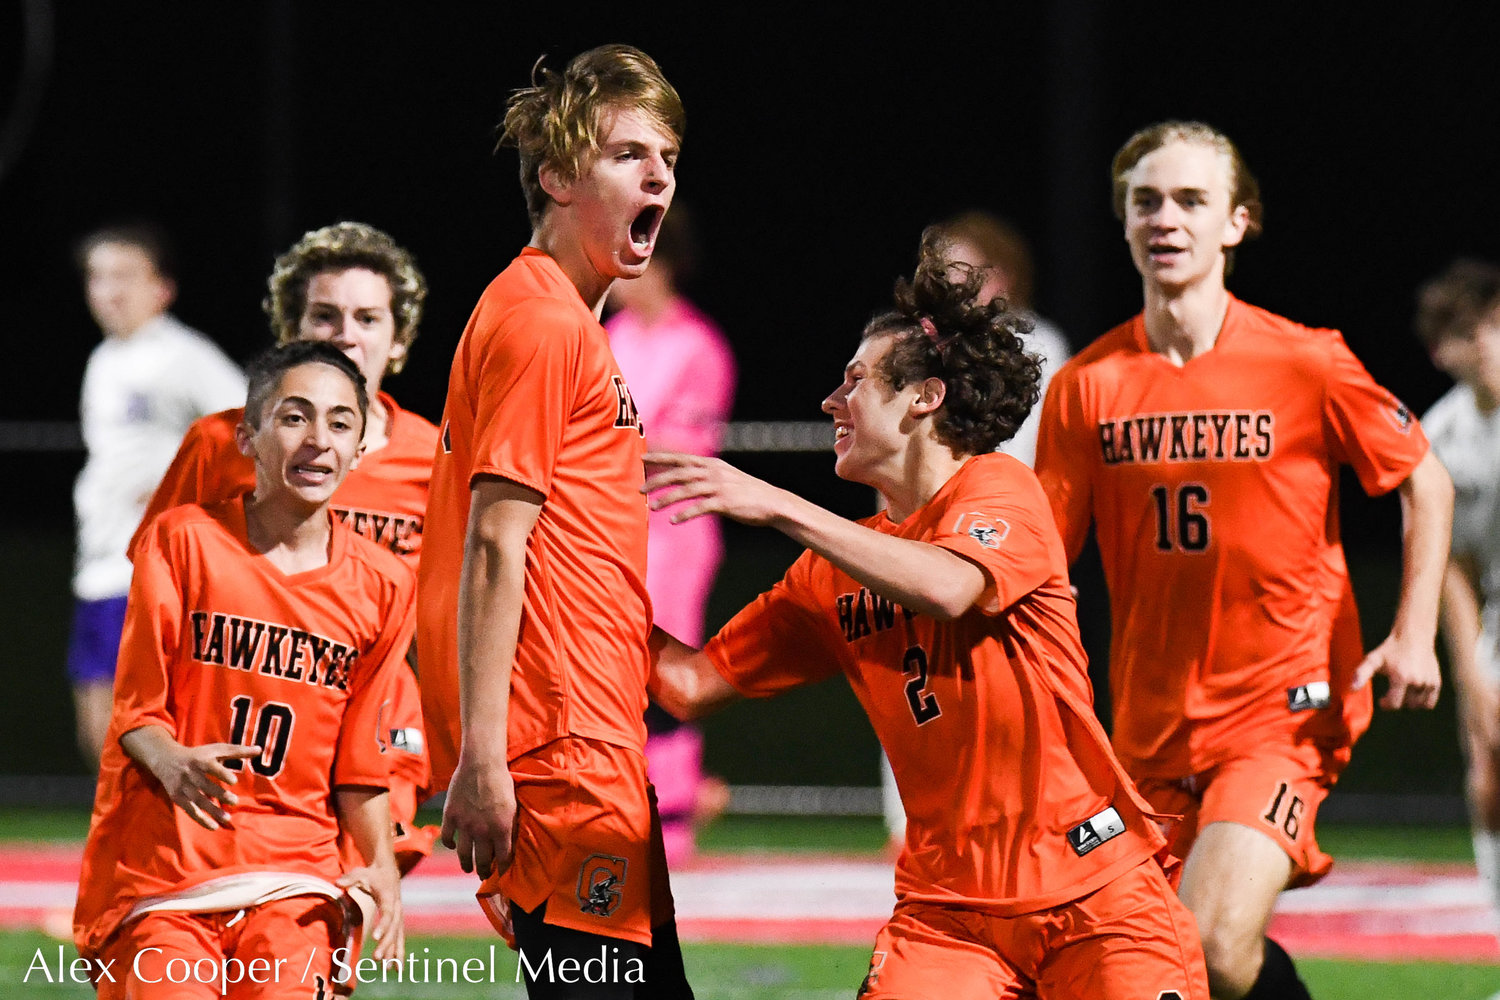 Cooperstown player Oliver Wasson (9) celebrates with teammates after scoring the winning goal in overtime during the Section III Class C final against Waterville on Tuesday, Nov. 1 at VVS High School.